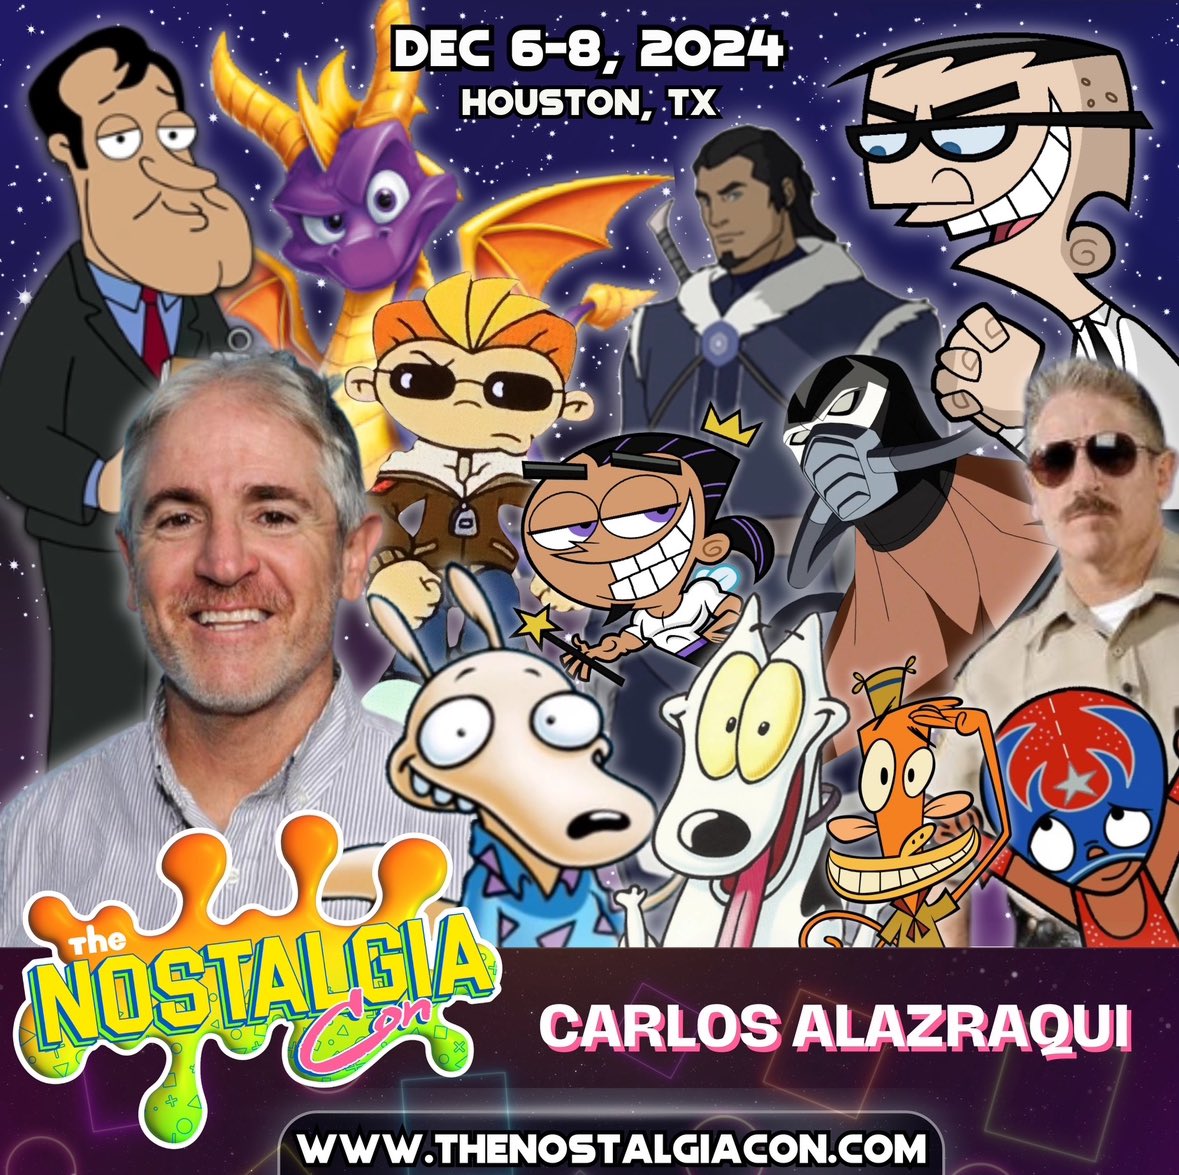 FAIRIES!!!! @carlosalazraqui is a generational talent and lent his golden pipes some unforgettable characters we all group up on. Maybe you’ll get to see him chasing Cosmo and Wanda at the show too 👀 Carlos has an insane body of work and is one of those guests you have to meet!